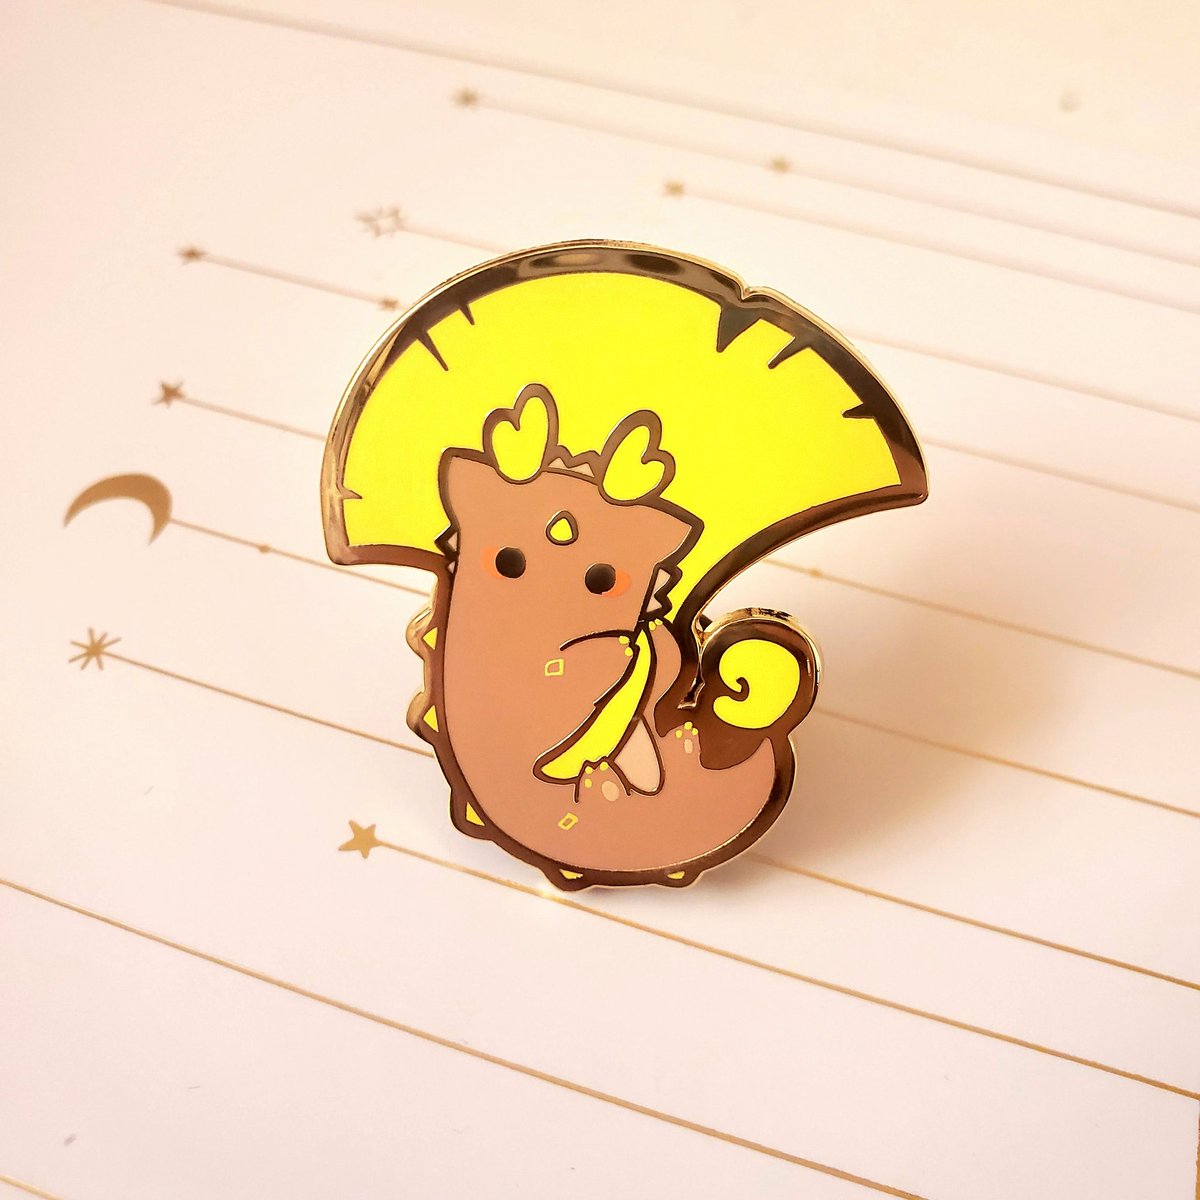 「These pins will be available next shop u」|Nagarniaのイラスト